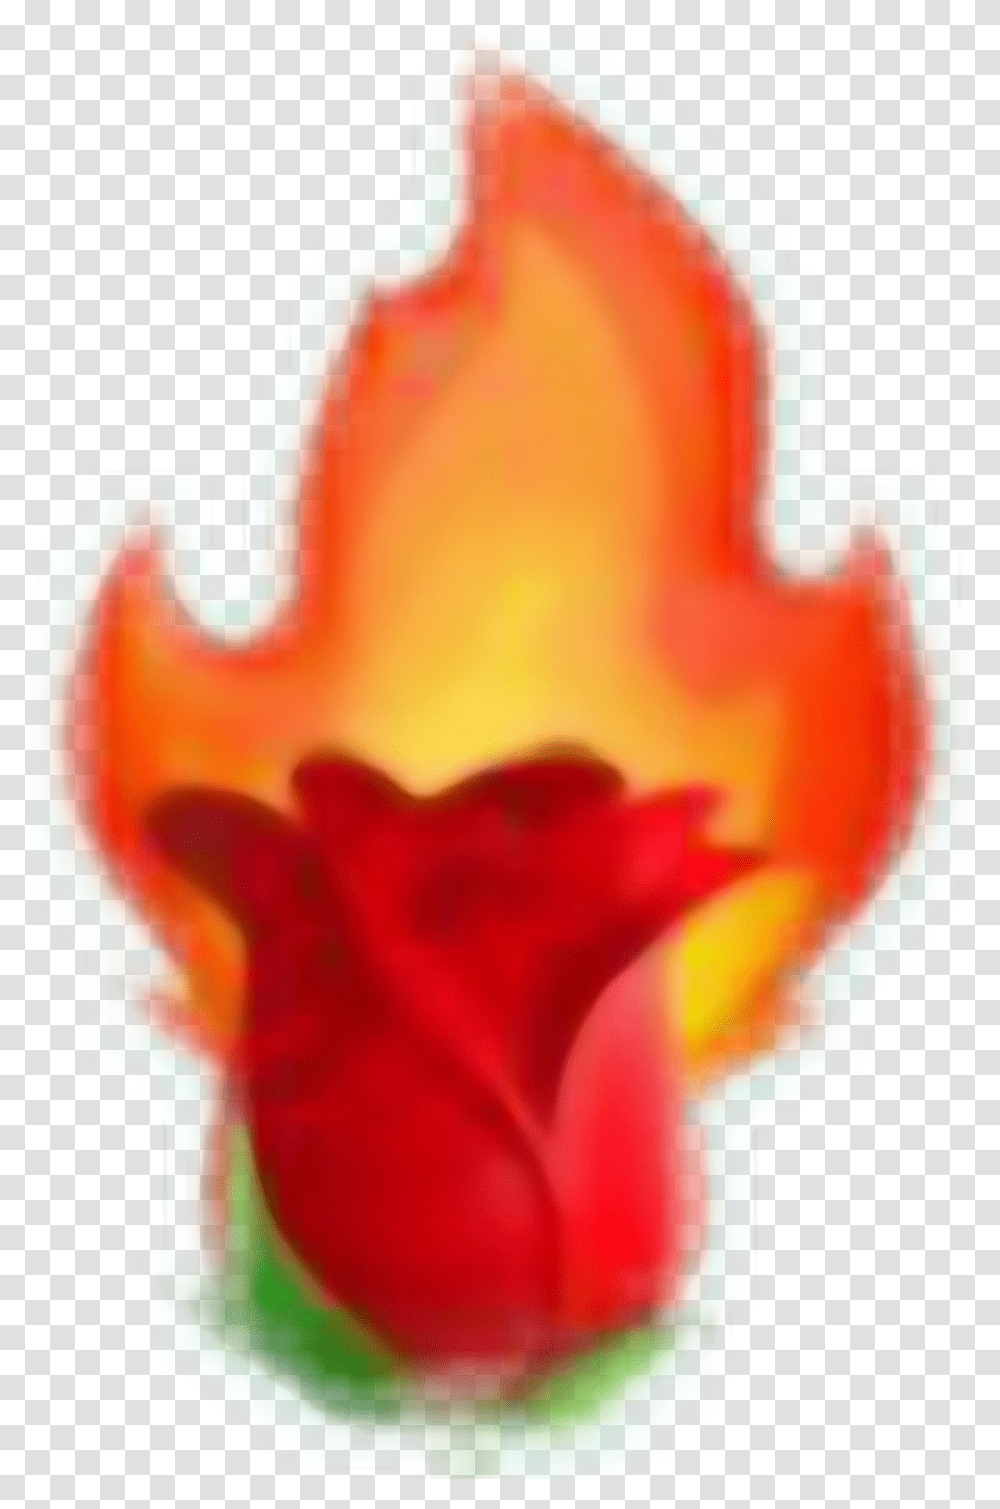 Rose Fire Tumblr Aesthetic Aestheticred Red Emojis Aesthetic Red Emojis, Flower, Plant, Blossom, Flame Transparent Png